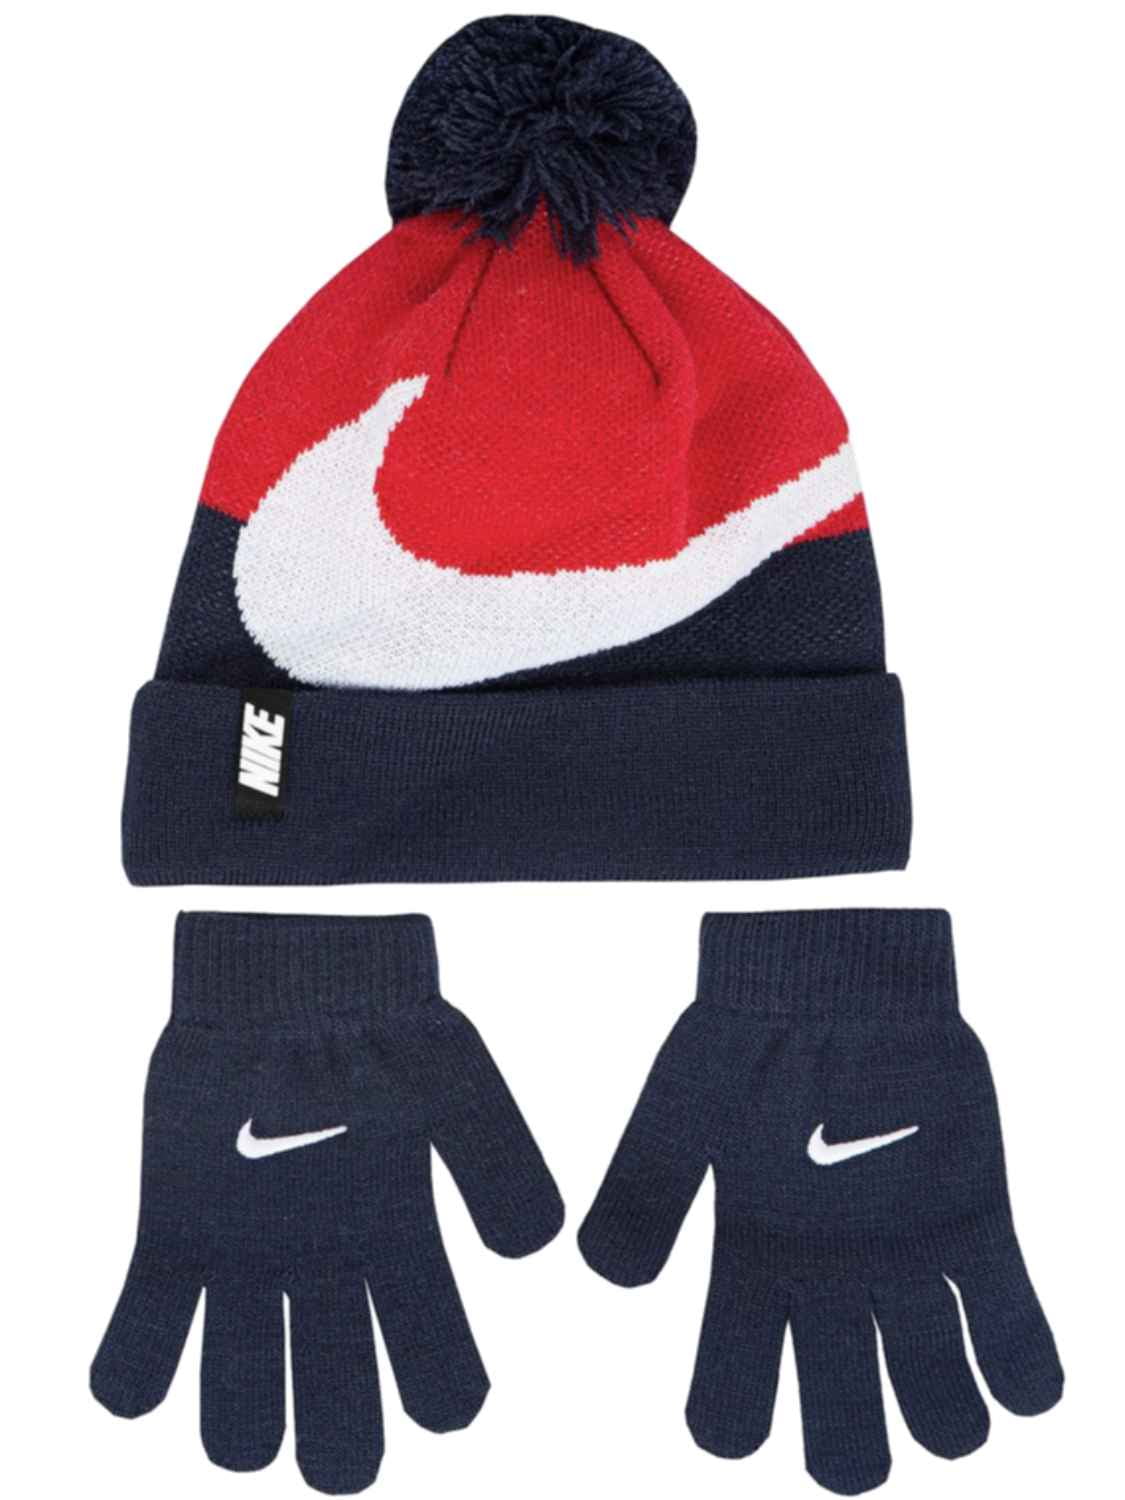 nike winter hat and gloves